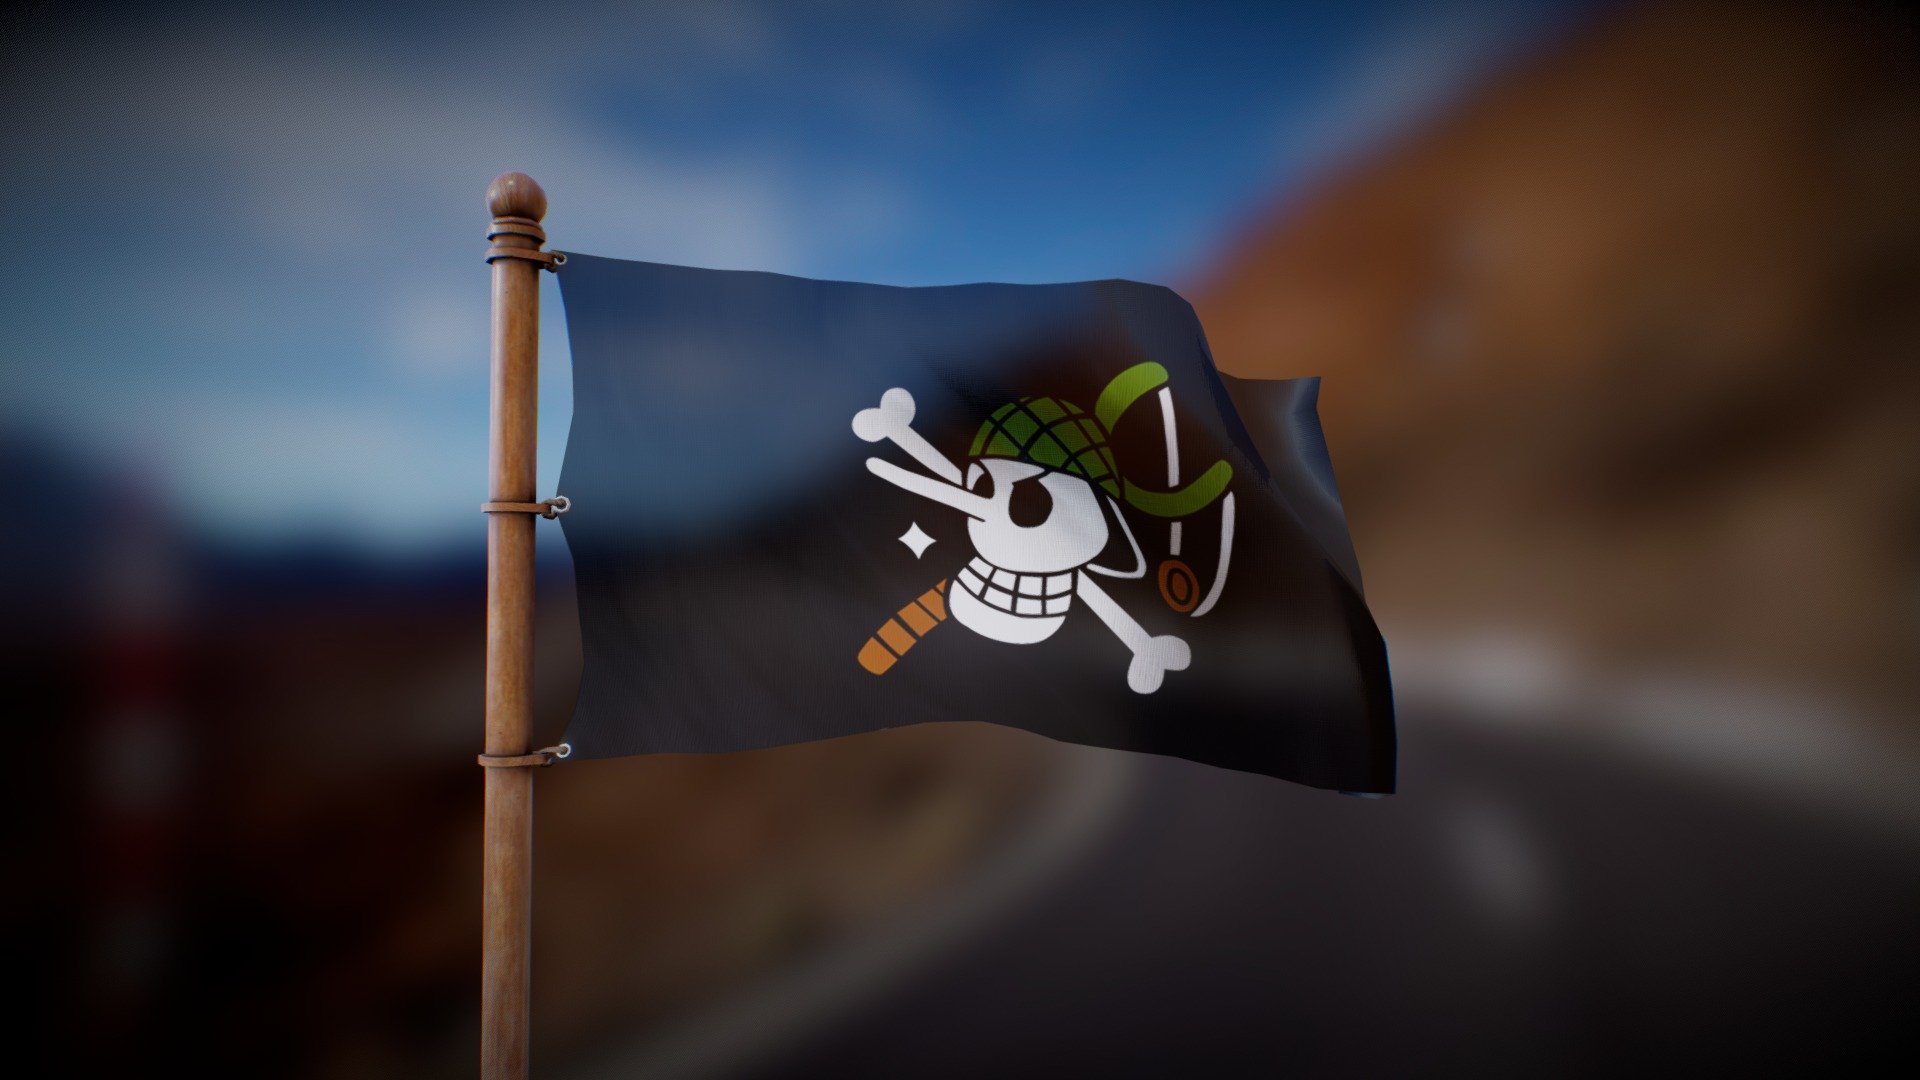 One Piece Usopp Pirate Flag Jolly Roger Buy Royalty Free 3d Model By Deftroy 544c07b 8509